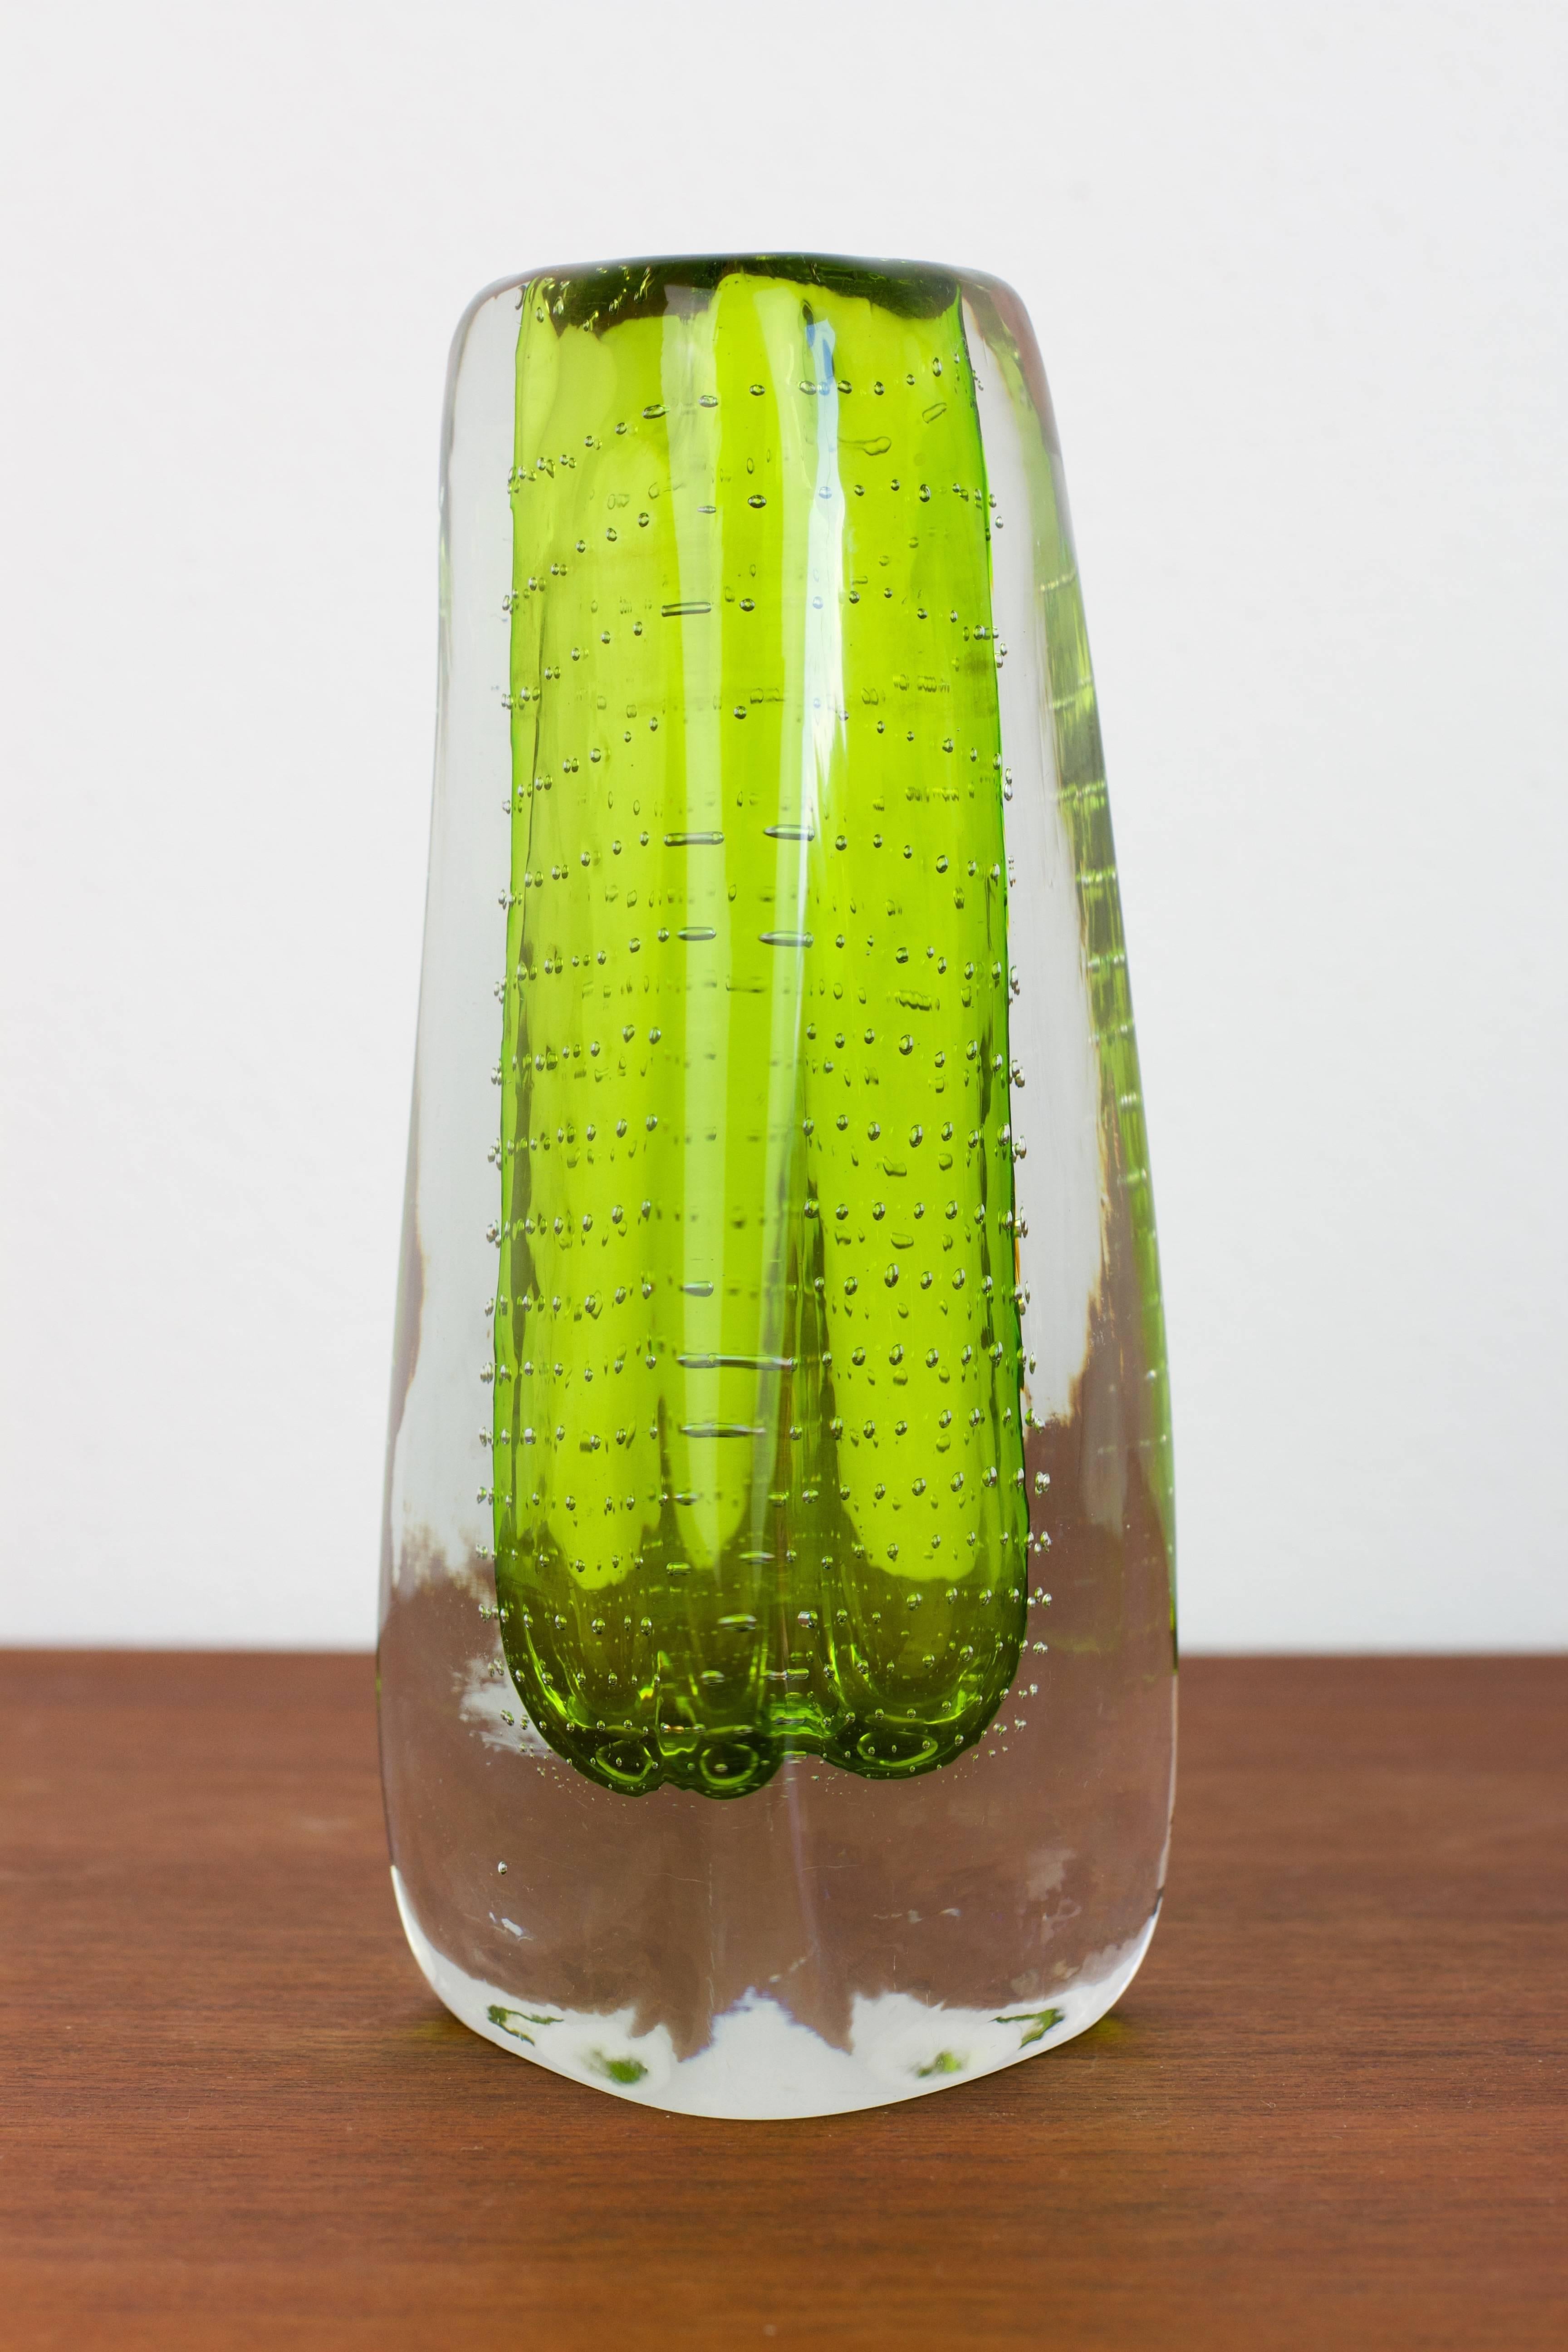 Very much in the style of Finnish designer Gunnel Nyman for Nuutajarvi Notsjo, Finland - this vintage Mid-Century vibrant emerald green ice glass looks typically Scandinavian however, it was produced by the German glass manufacturer Theresienthal